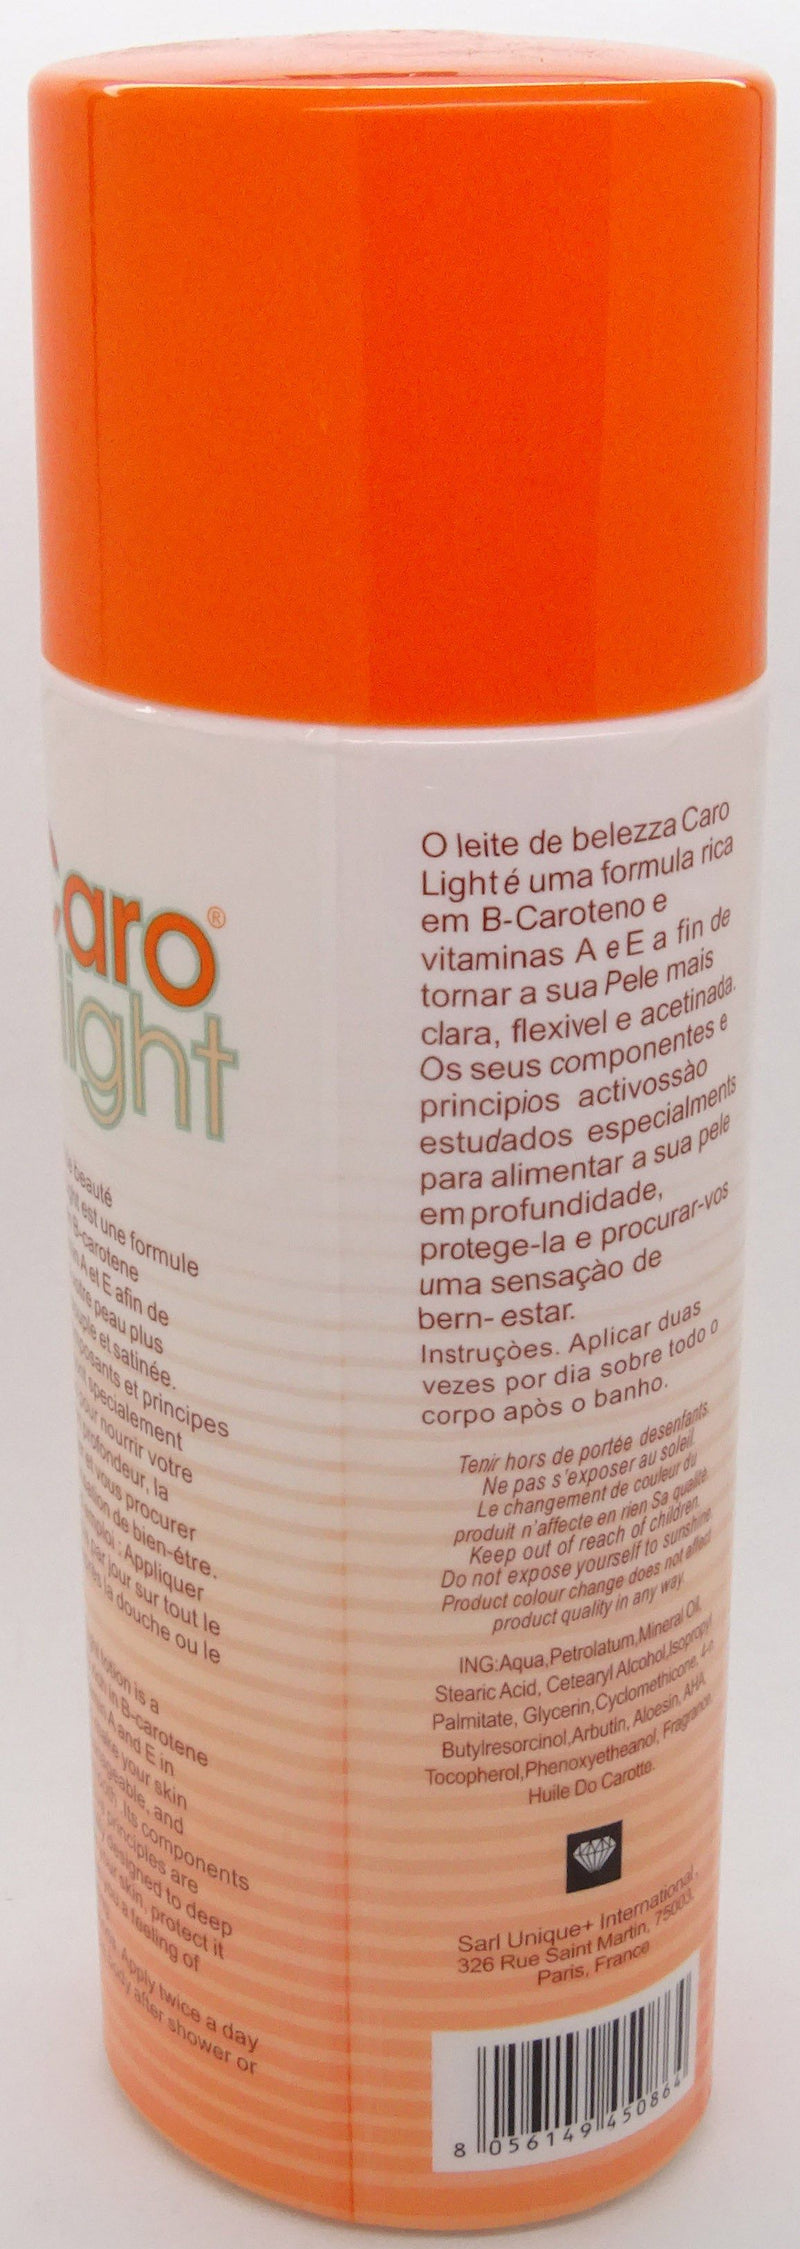 Caro light Lightening Beauty Lotion With Carrot Oil 500ml | gtworld.be 